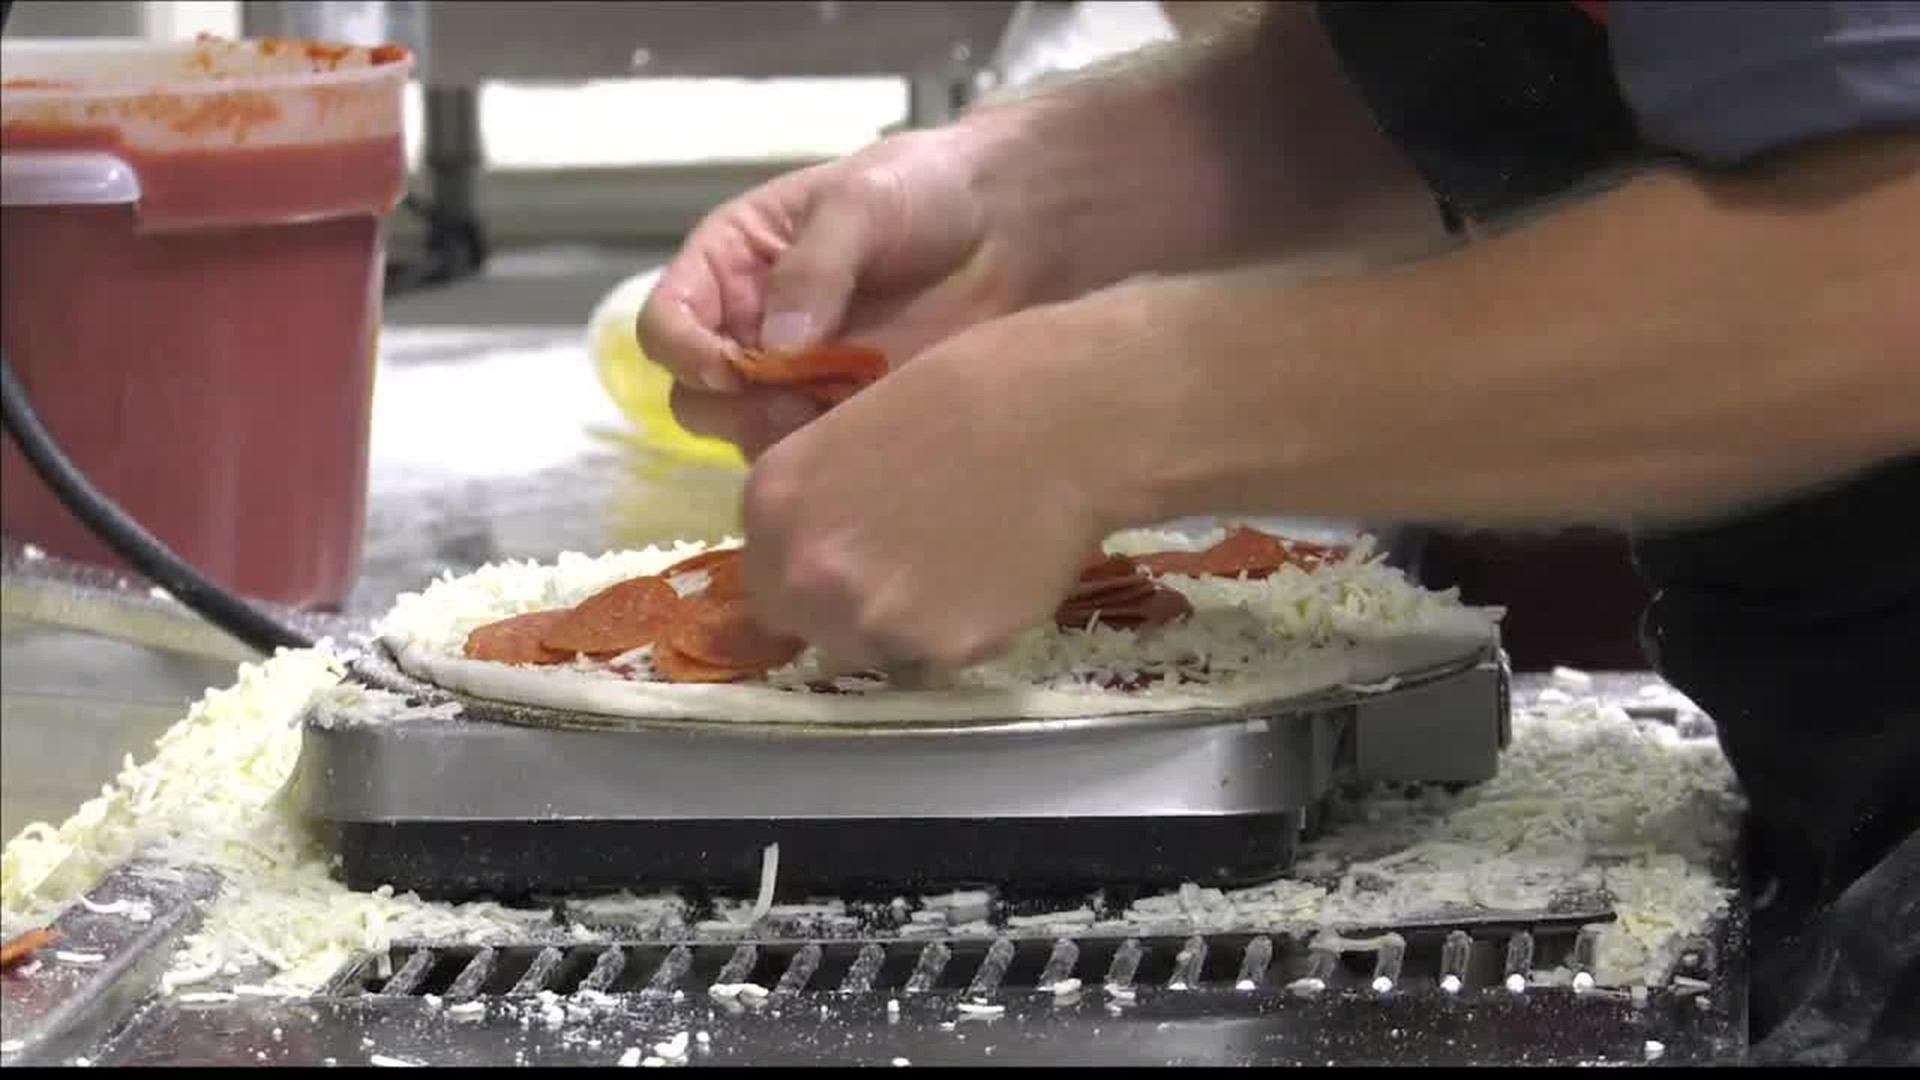 We told you a couple weeks a go that two local pizza makers were going to the Marco's Pizza fast and accurate contest.